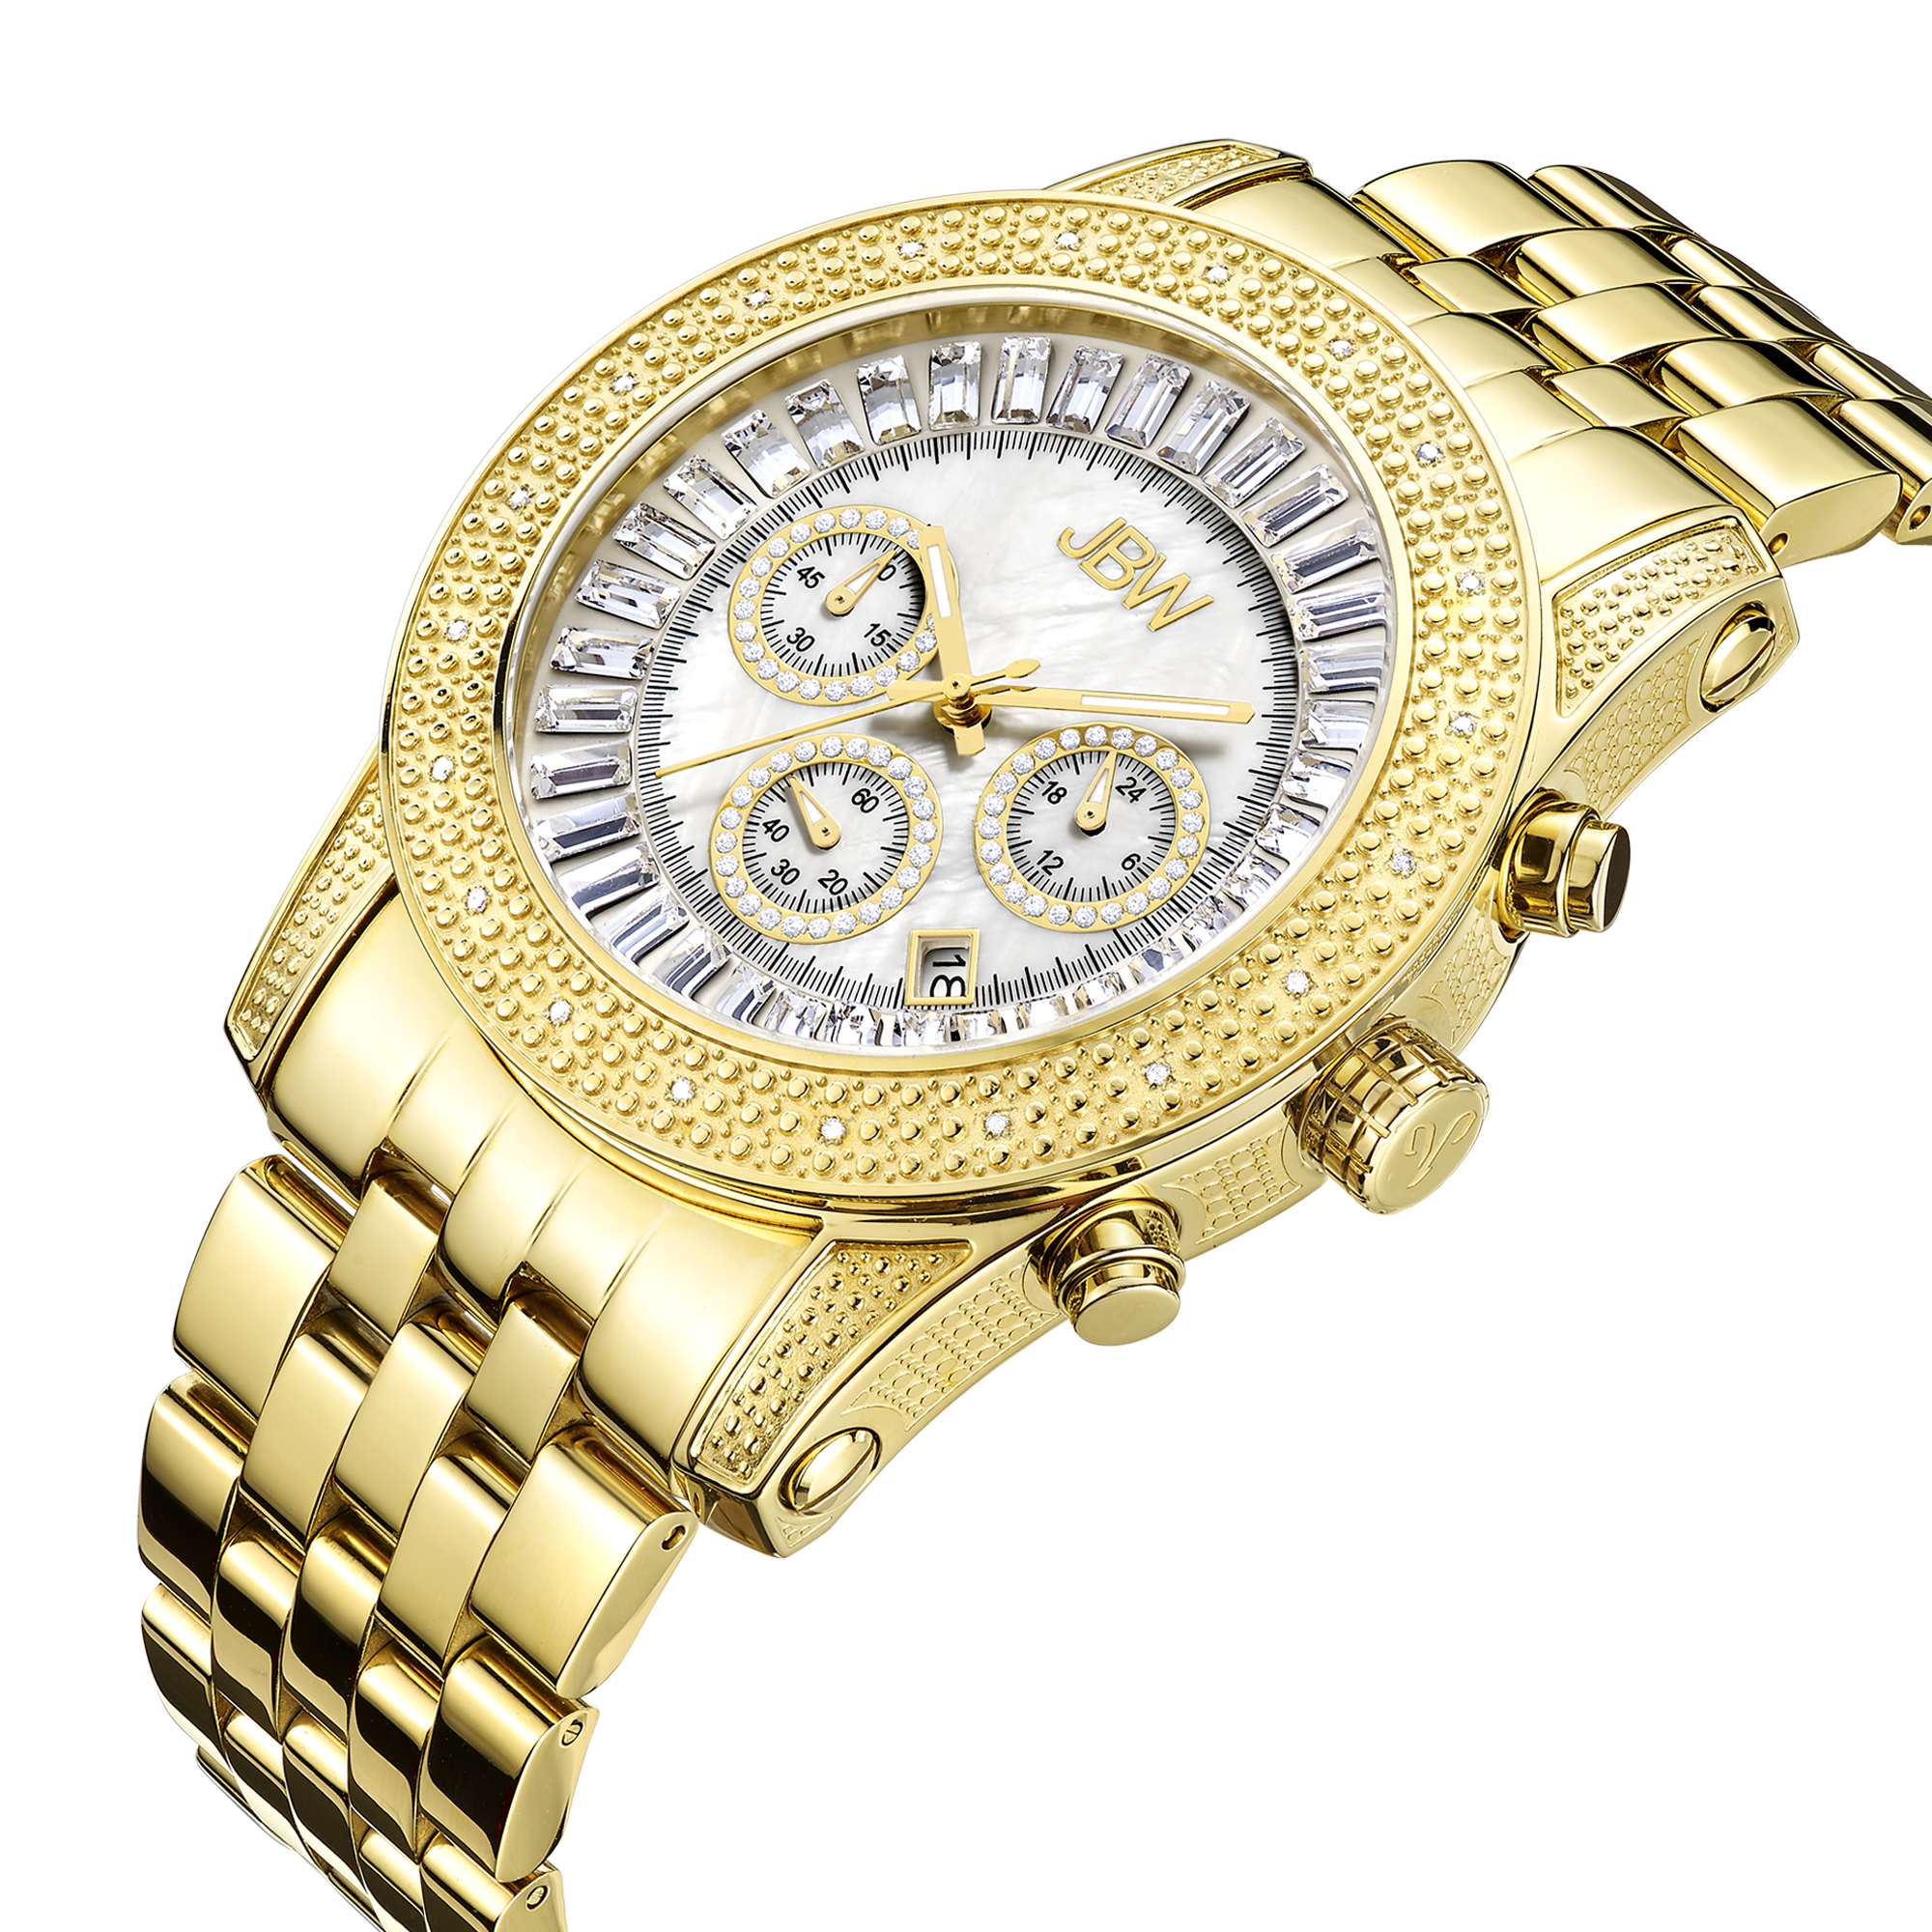 See clipart expensive watch. Jbw men s jb